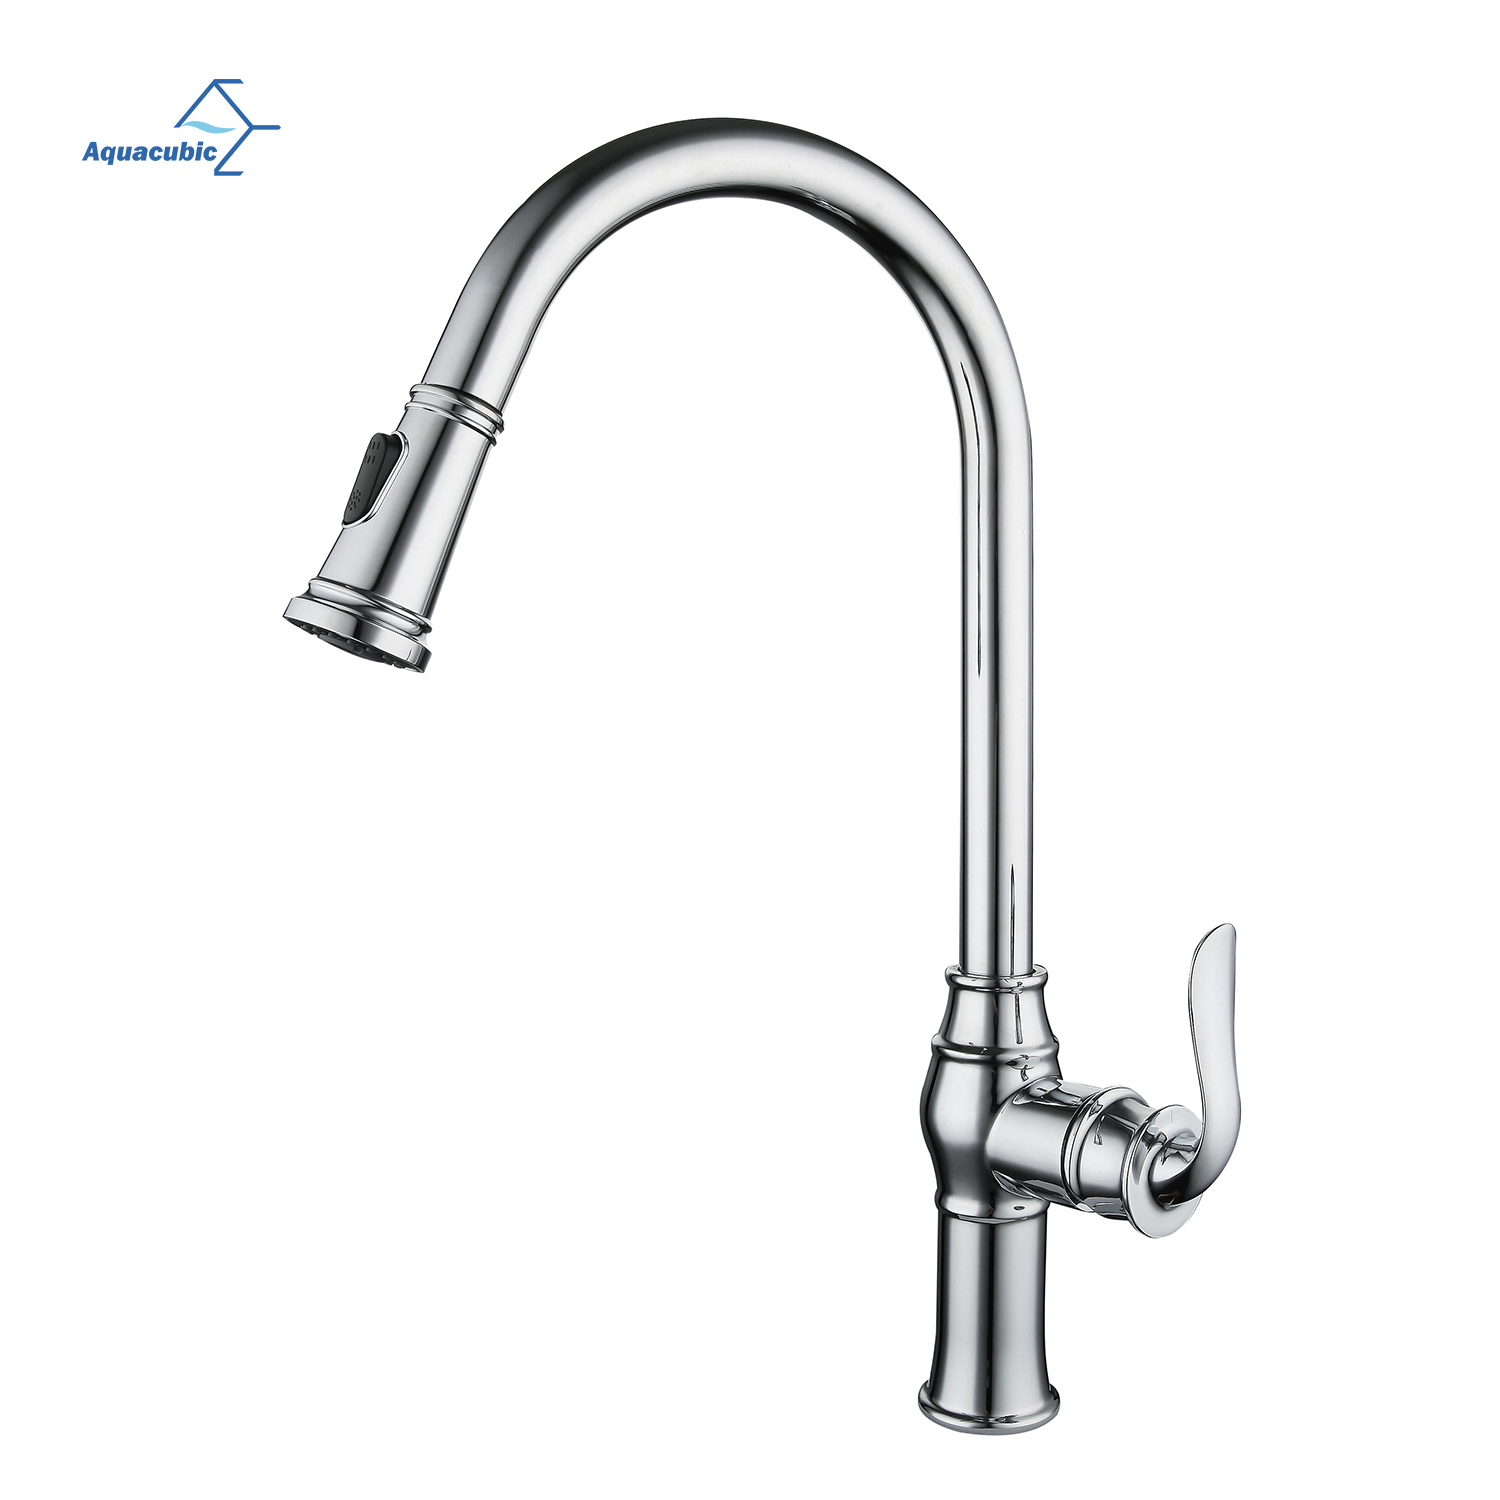  Aquacubic low lead cUPC Sanitair Contemporary Universal Pull Out Kitchen Kraan